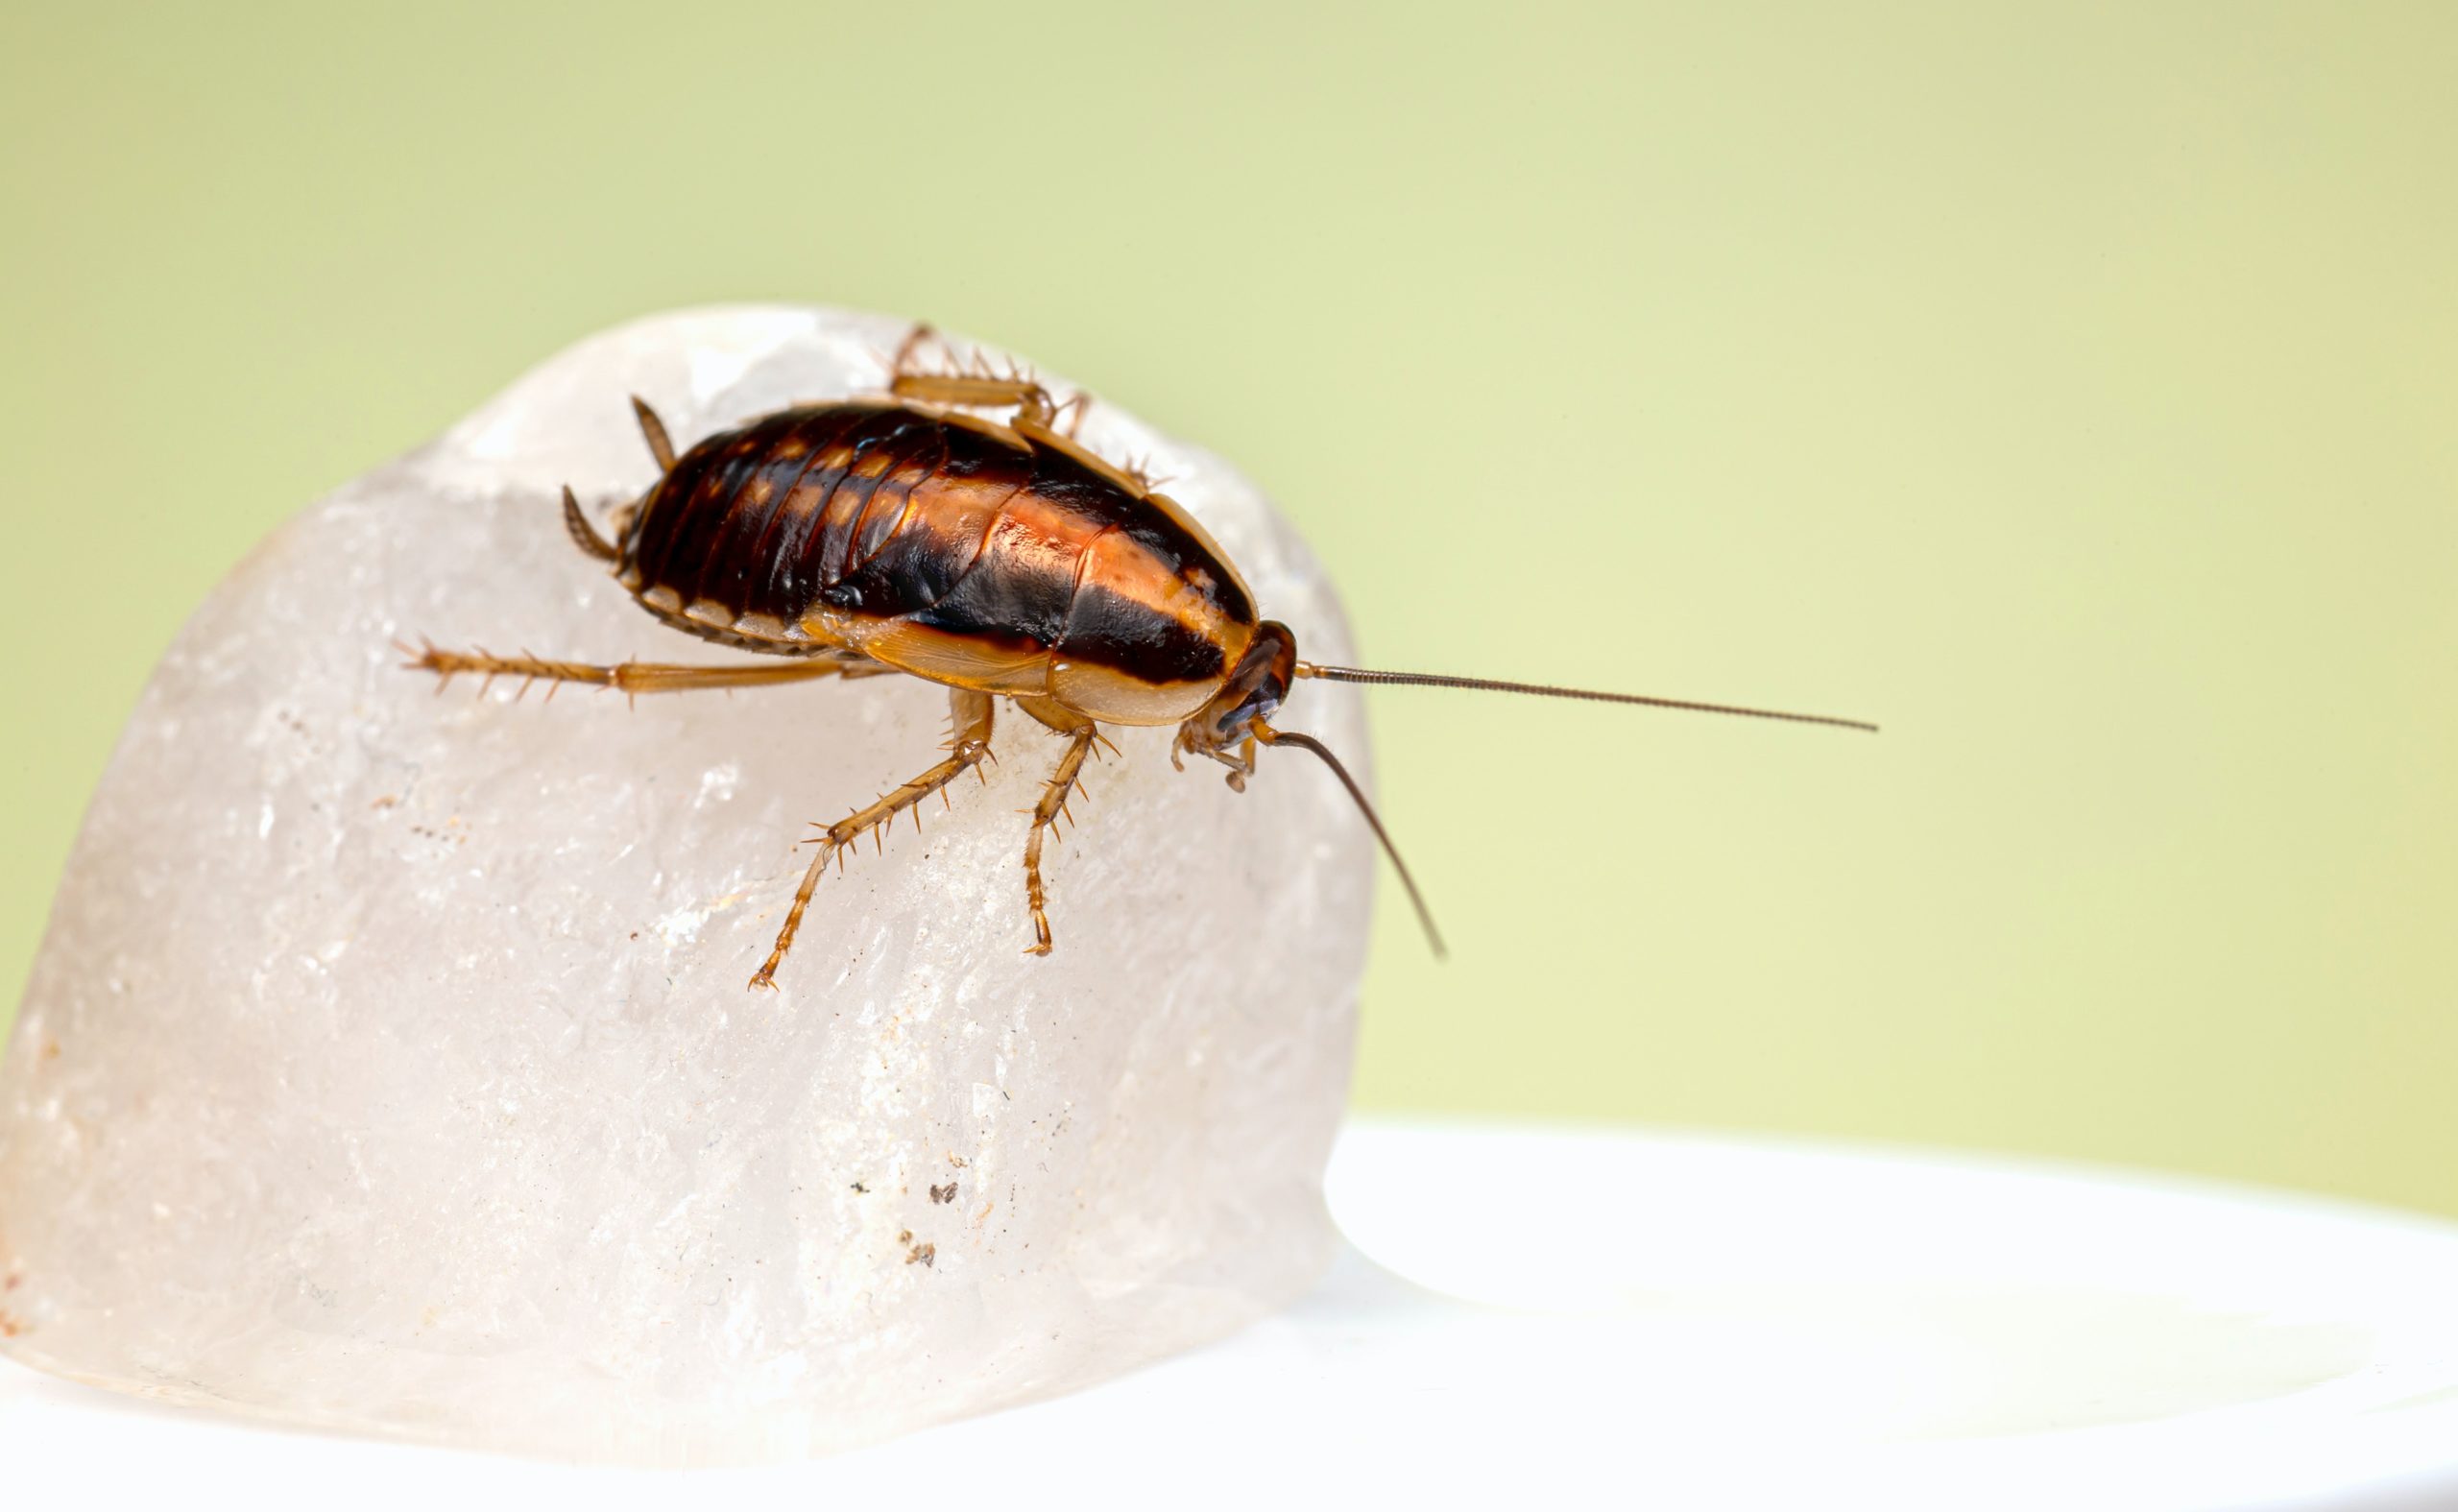 Cockroach Droppings Identification and Reasons For It